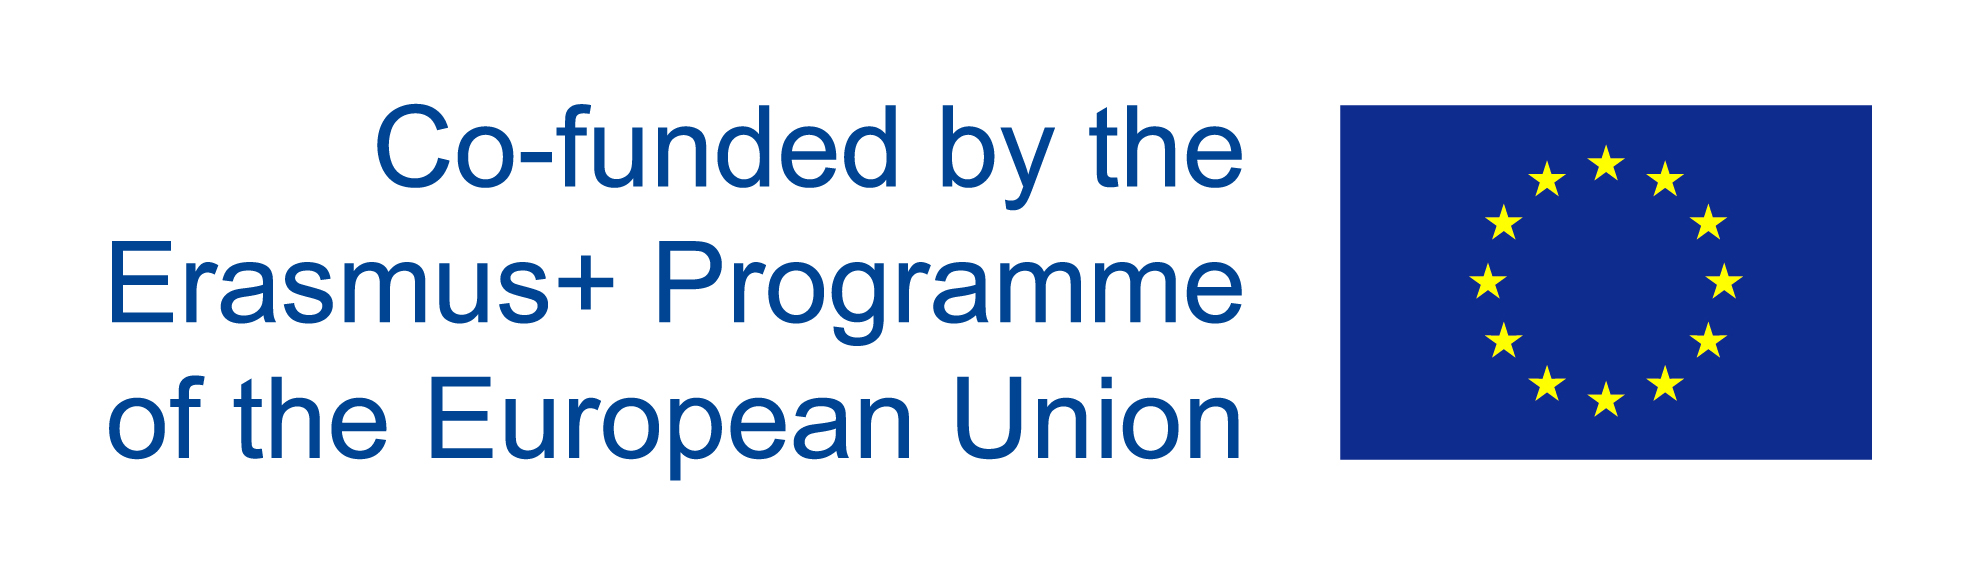 Co-Funded by the Erasmus+ logo